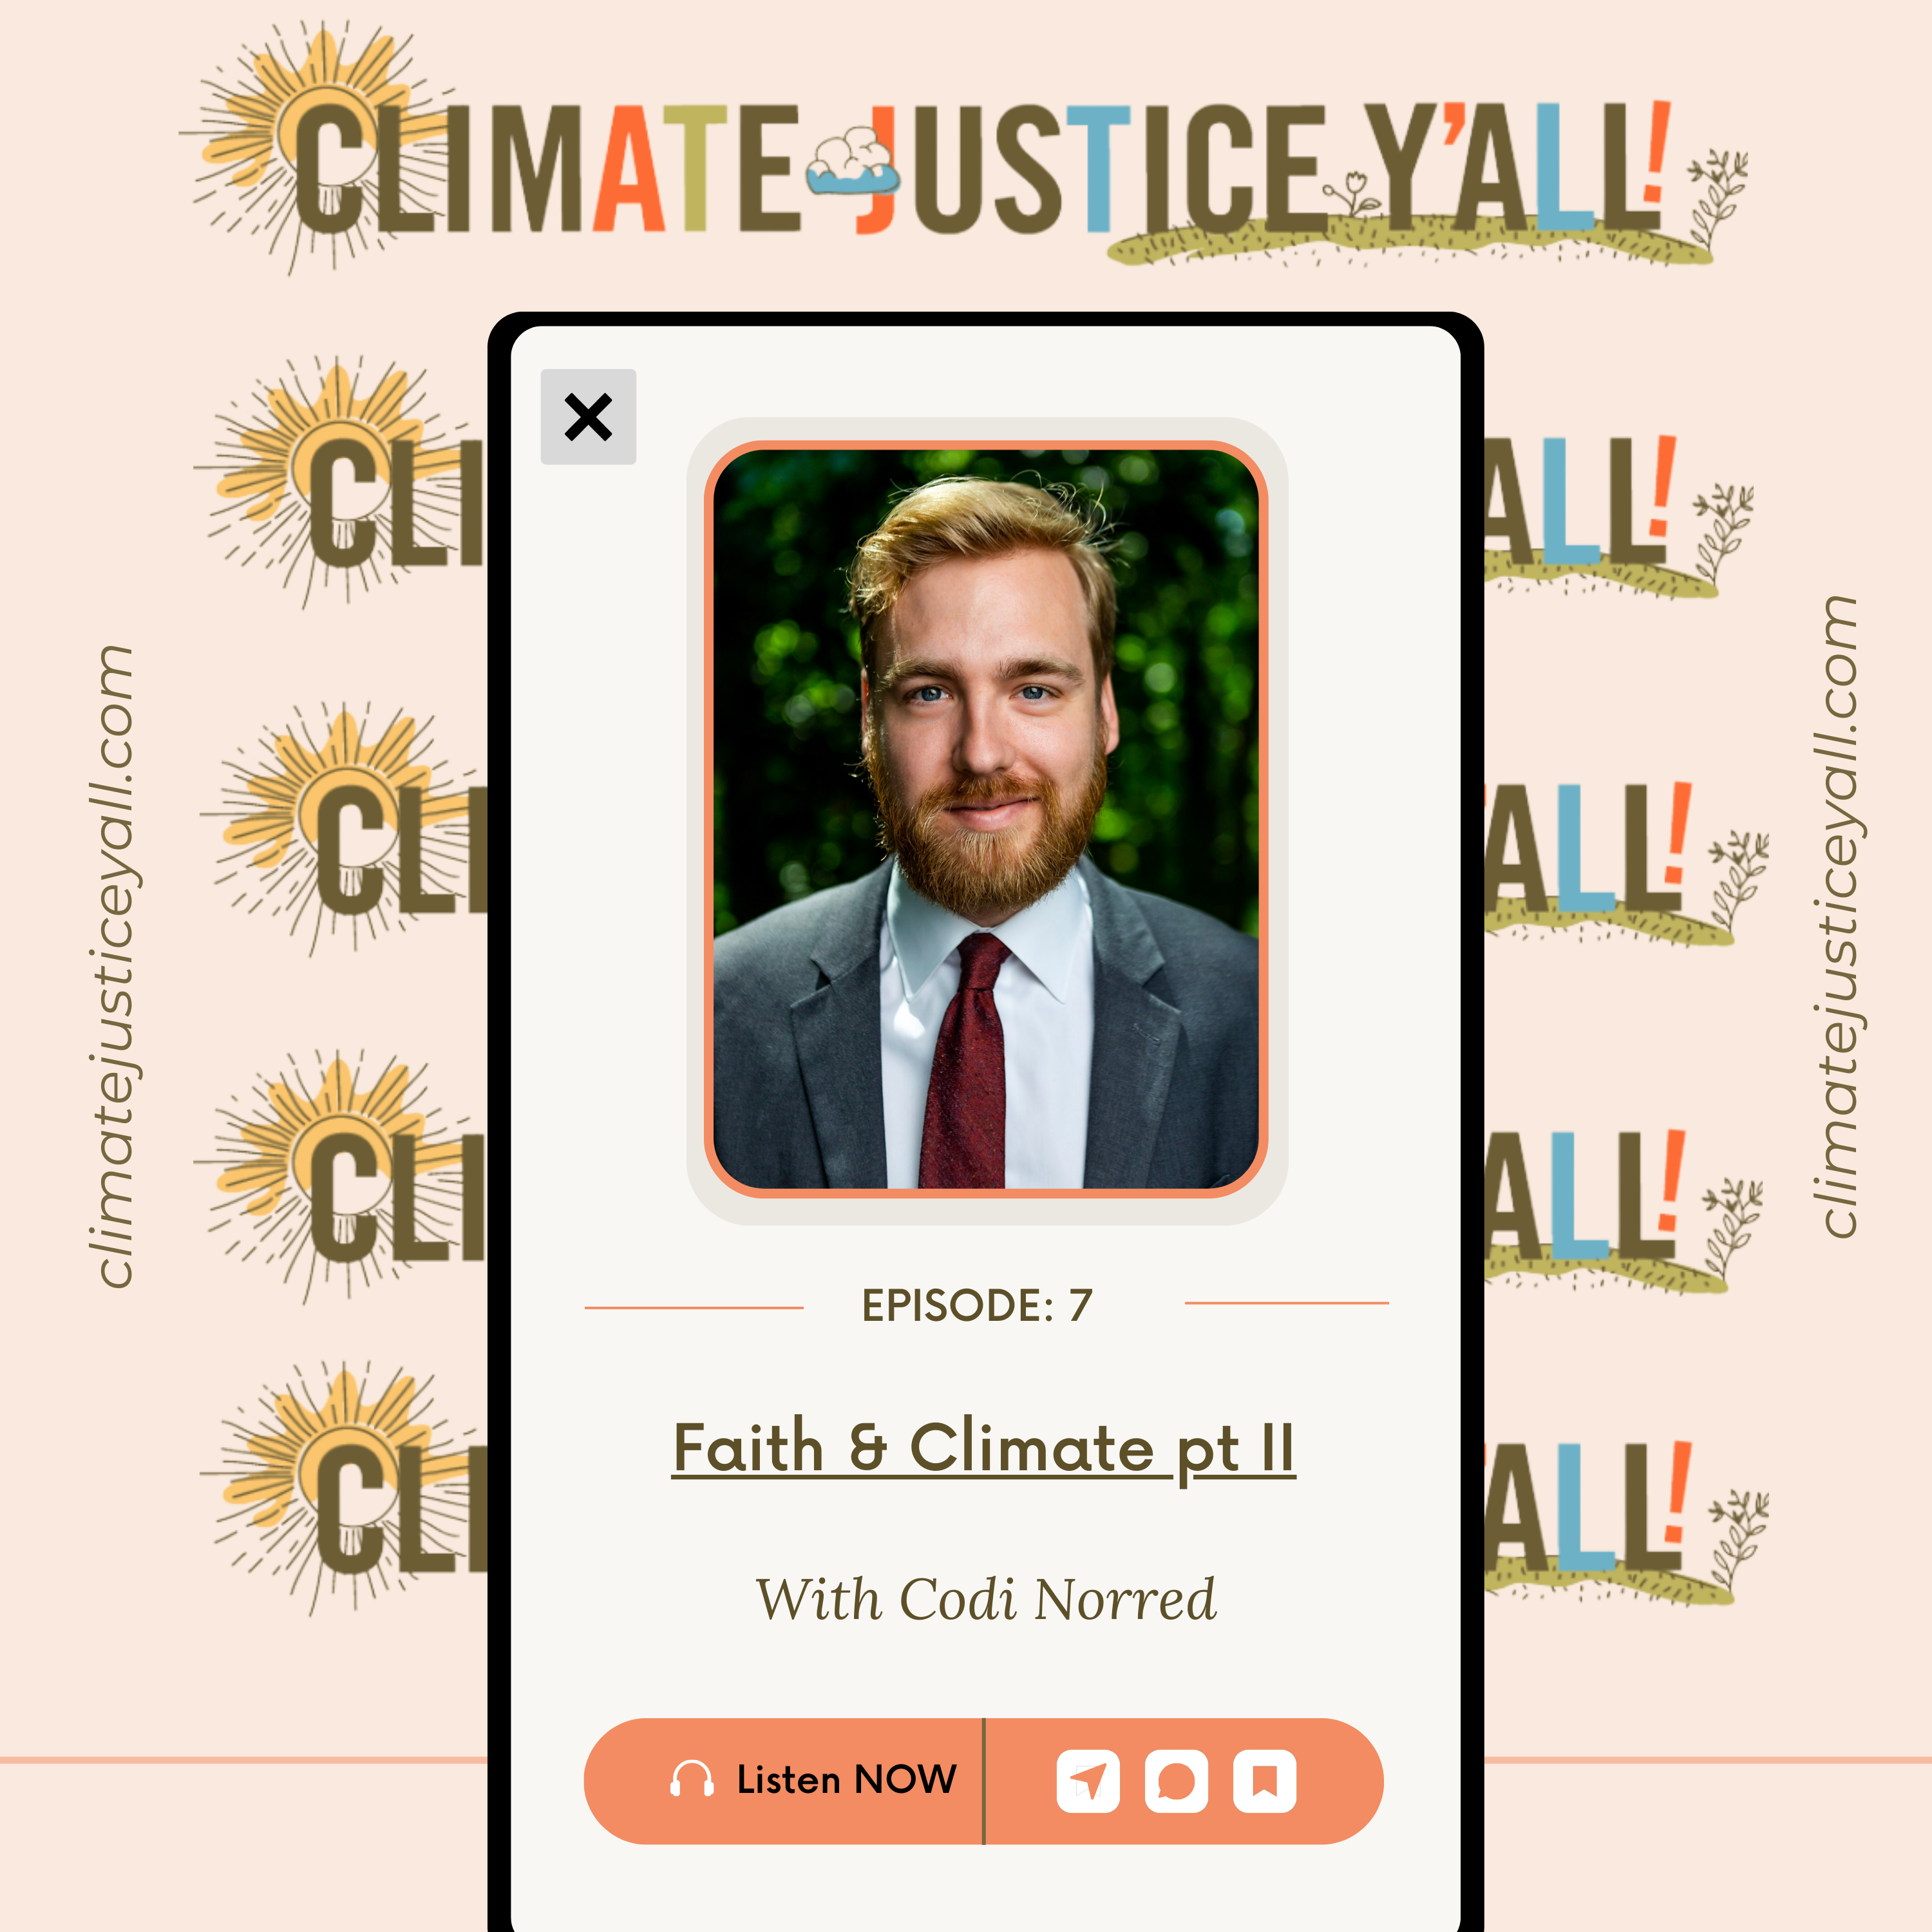 A promotional photo for season 2, episode 7 of Climate Justice y'all featuring Cody Norred